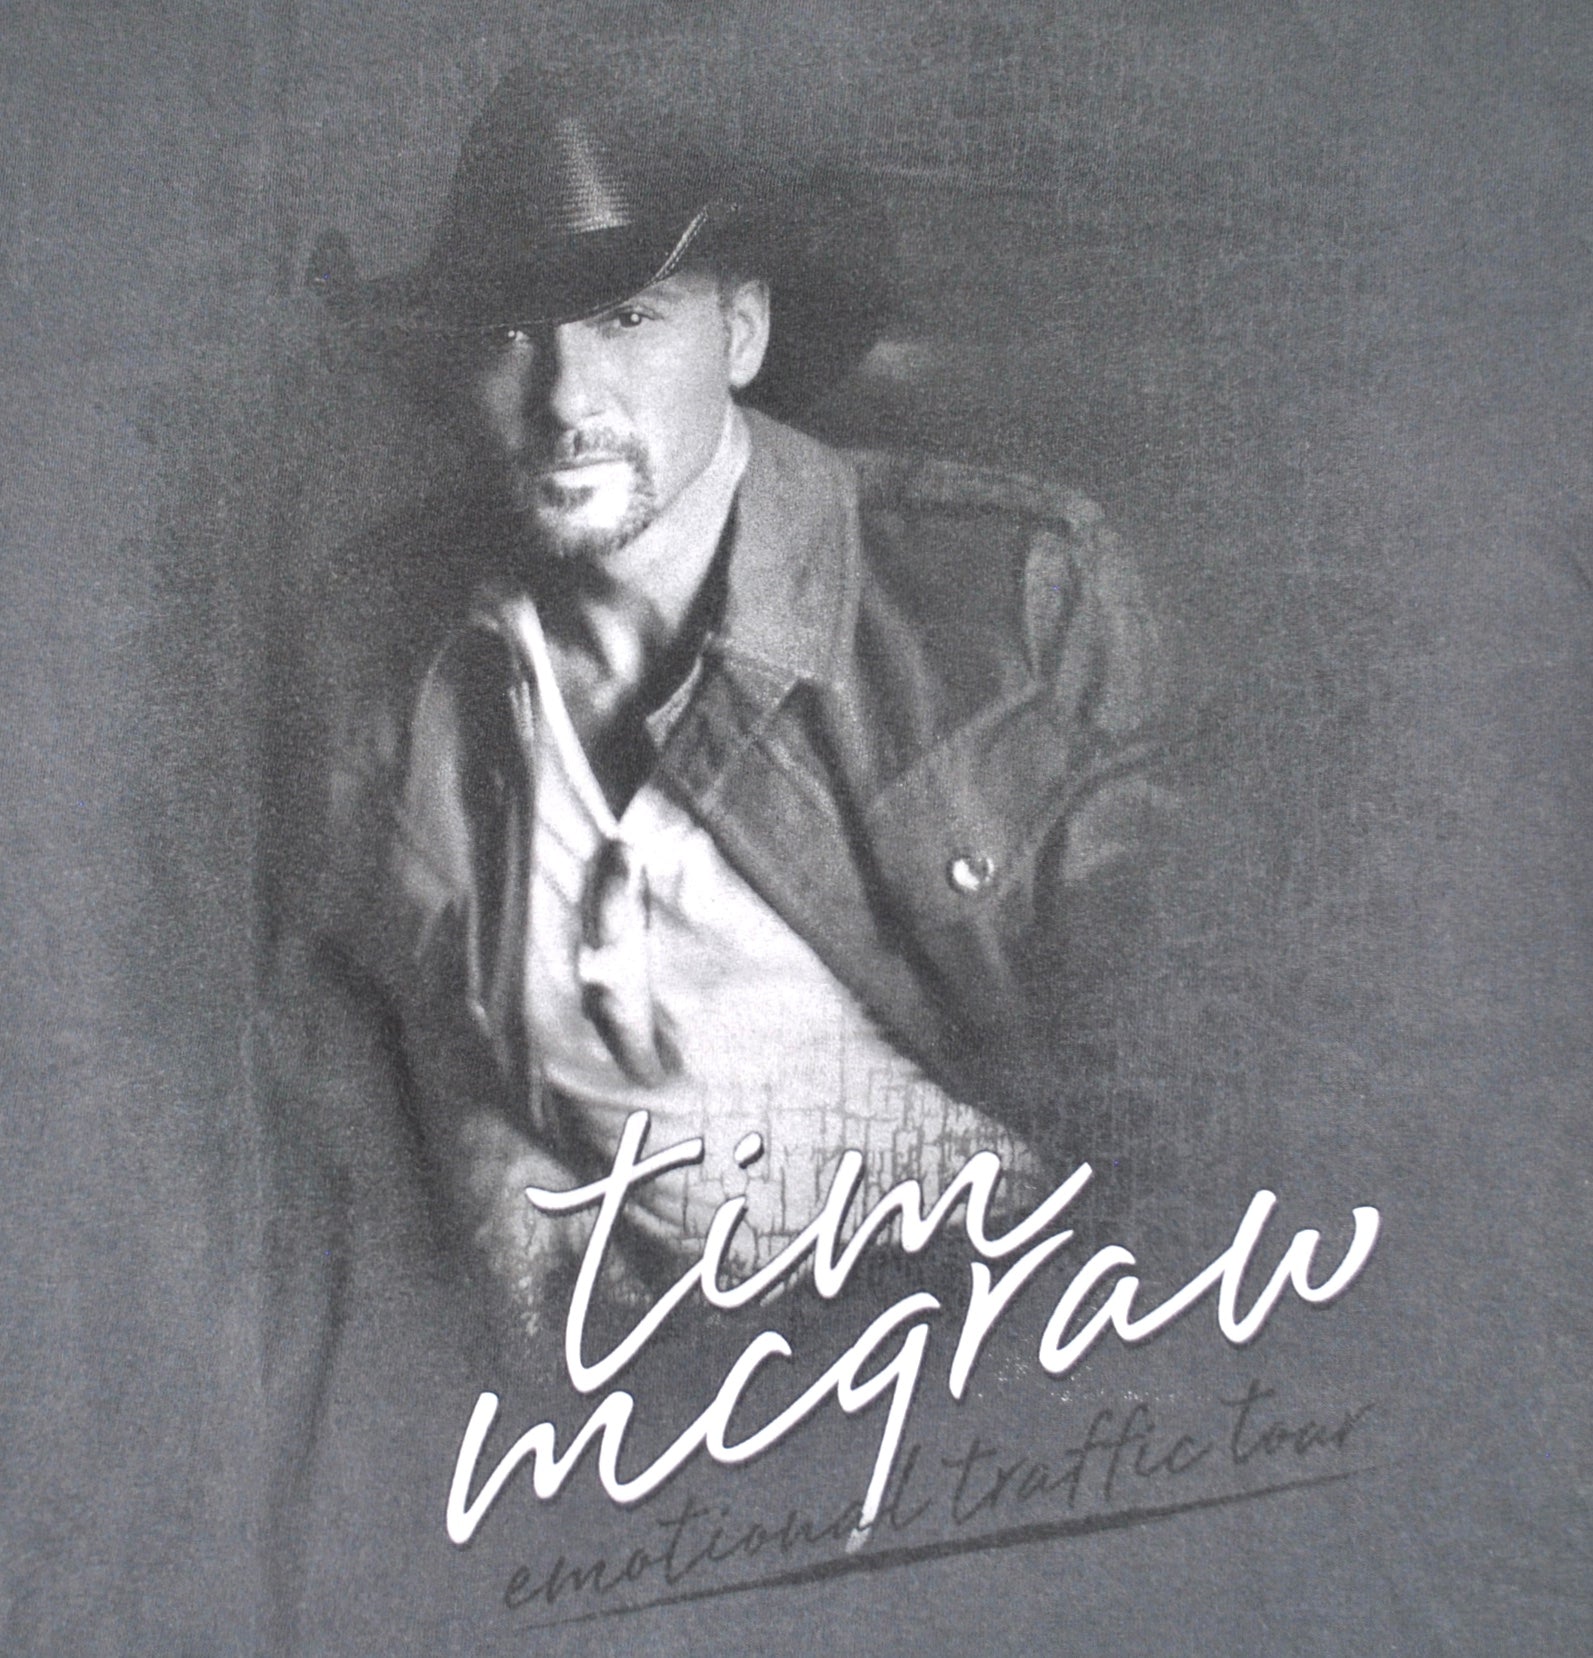 MCGRAW Gameday Longsleeve Tee  Shop the Tim McGraw Official Store